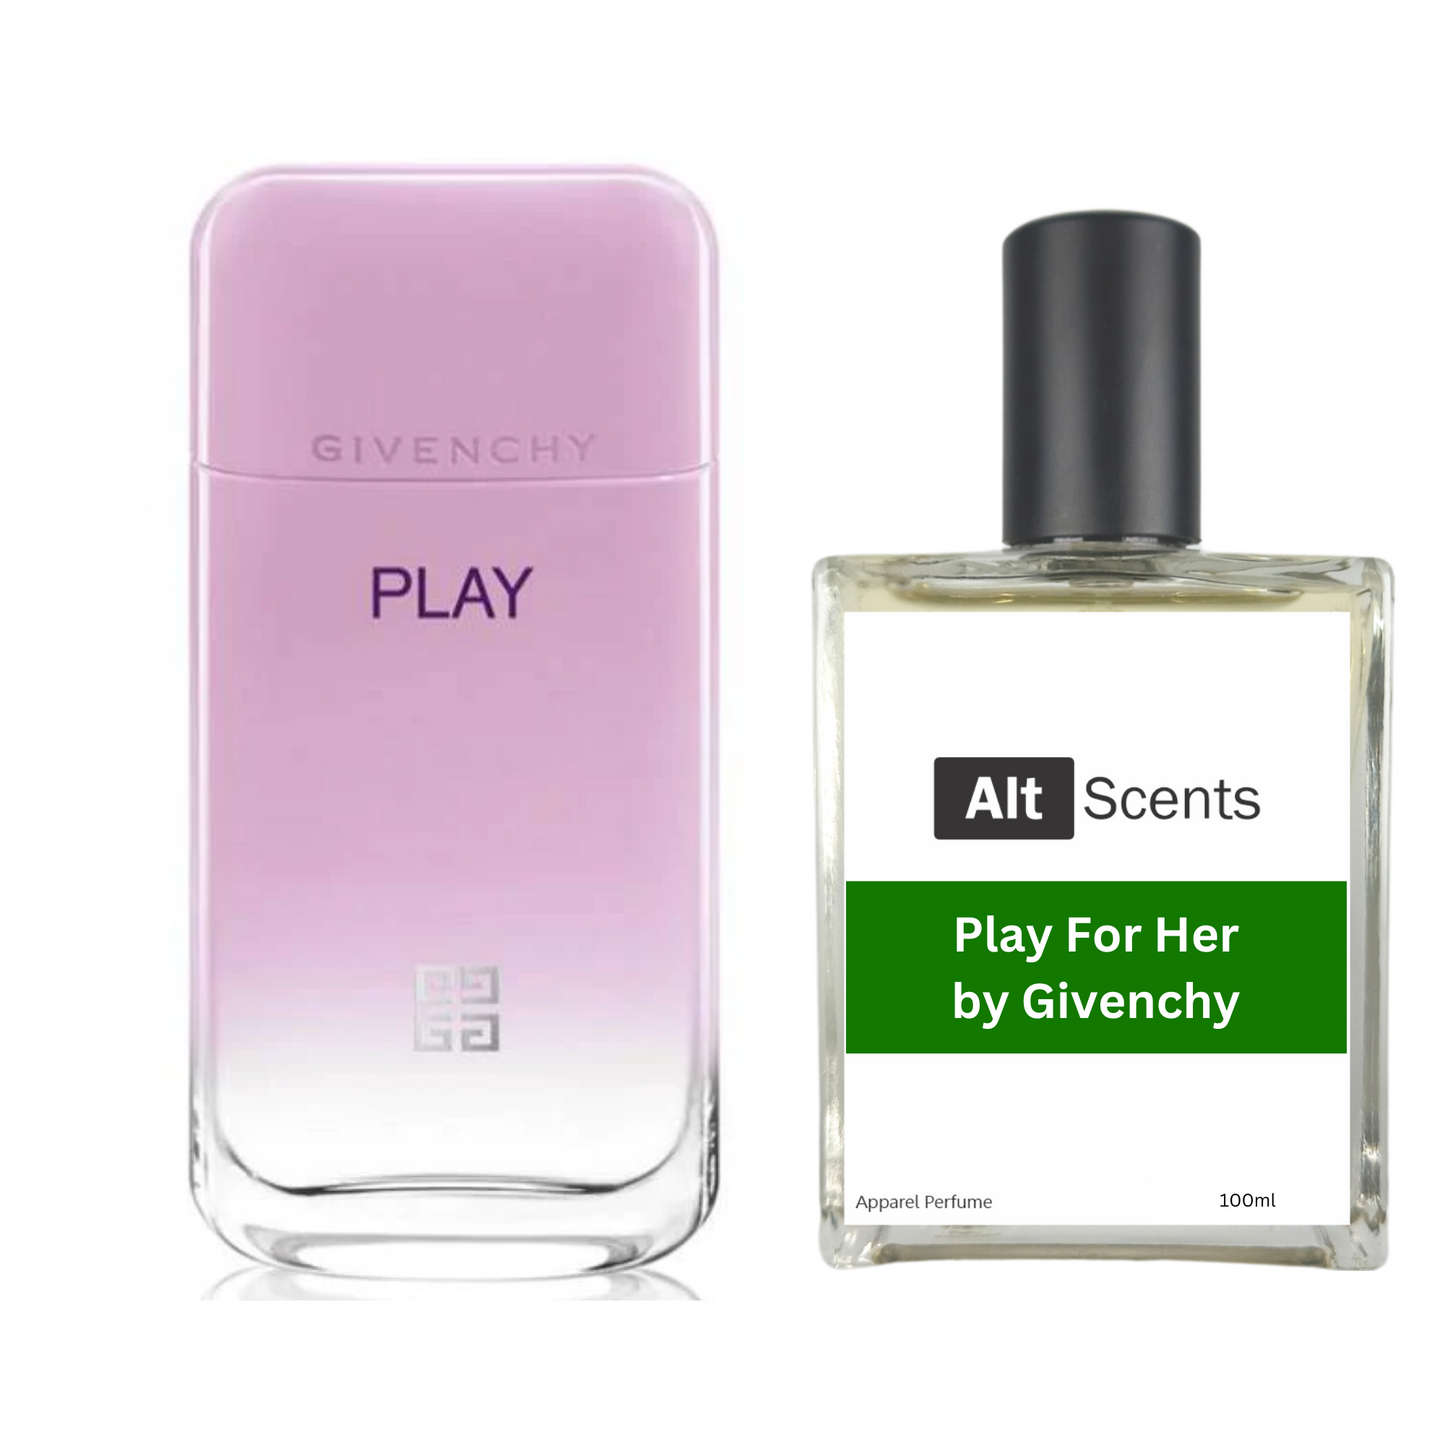 Play For Her by Givenchy